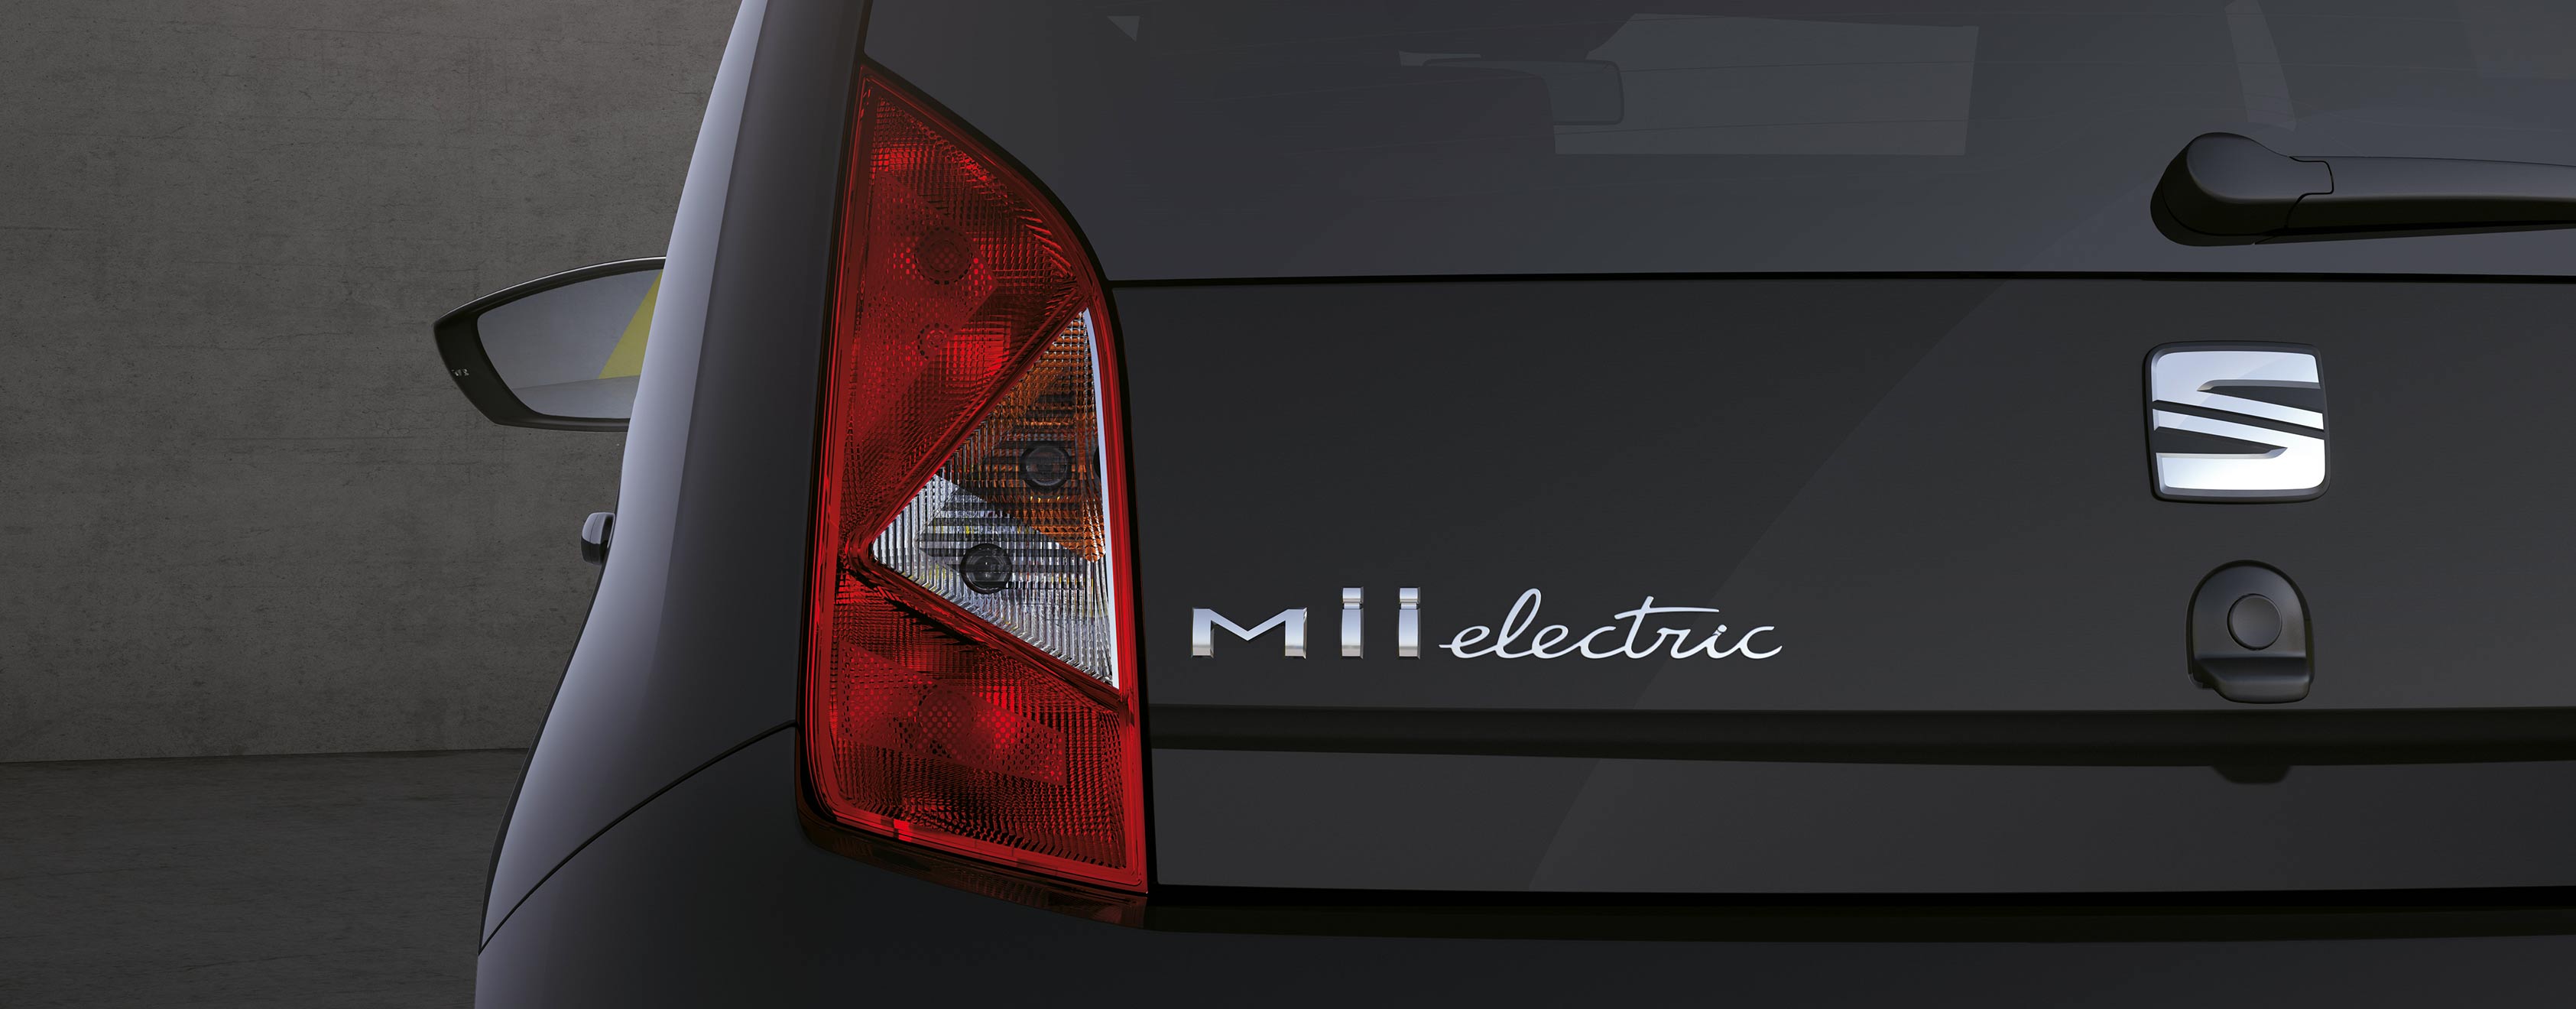 mii-electric-lettering